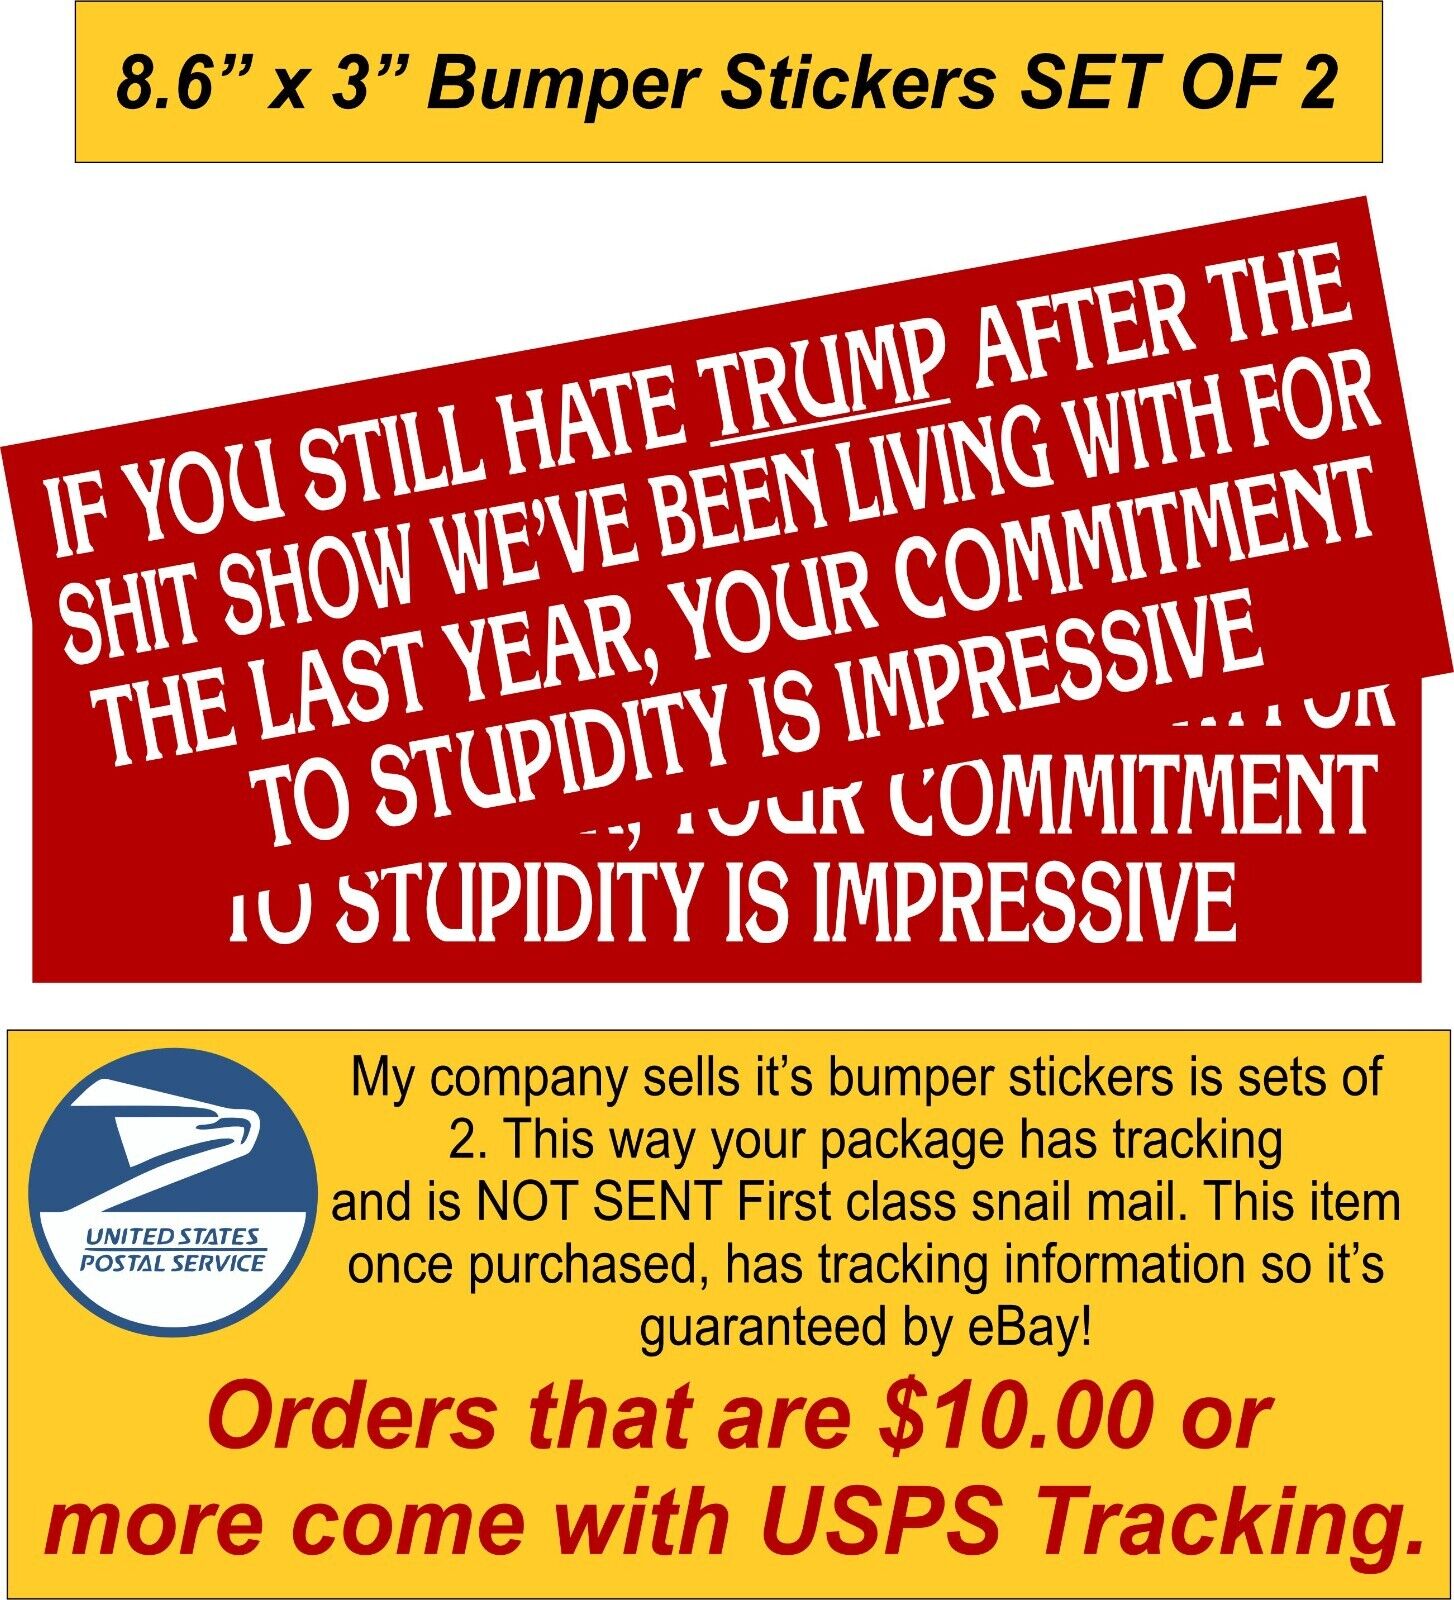 Commitment to Stupidity 8.6